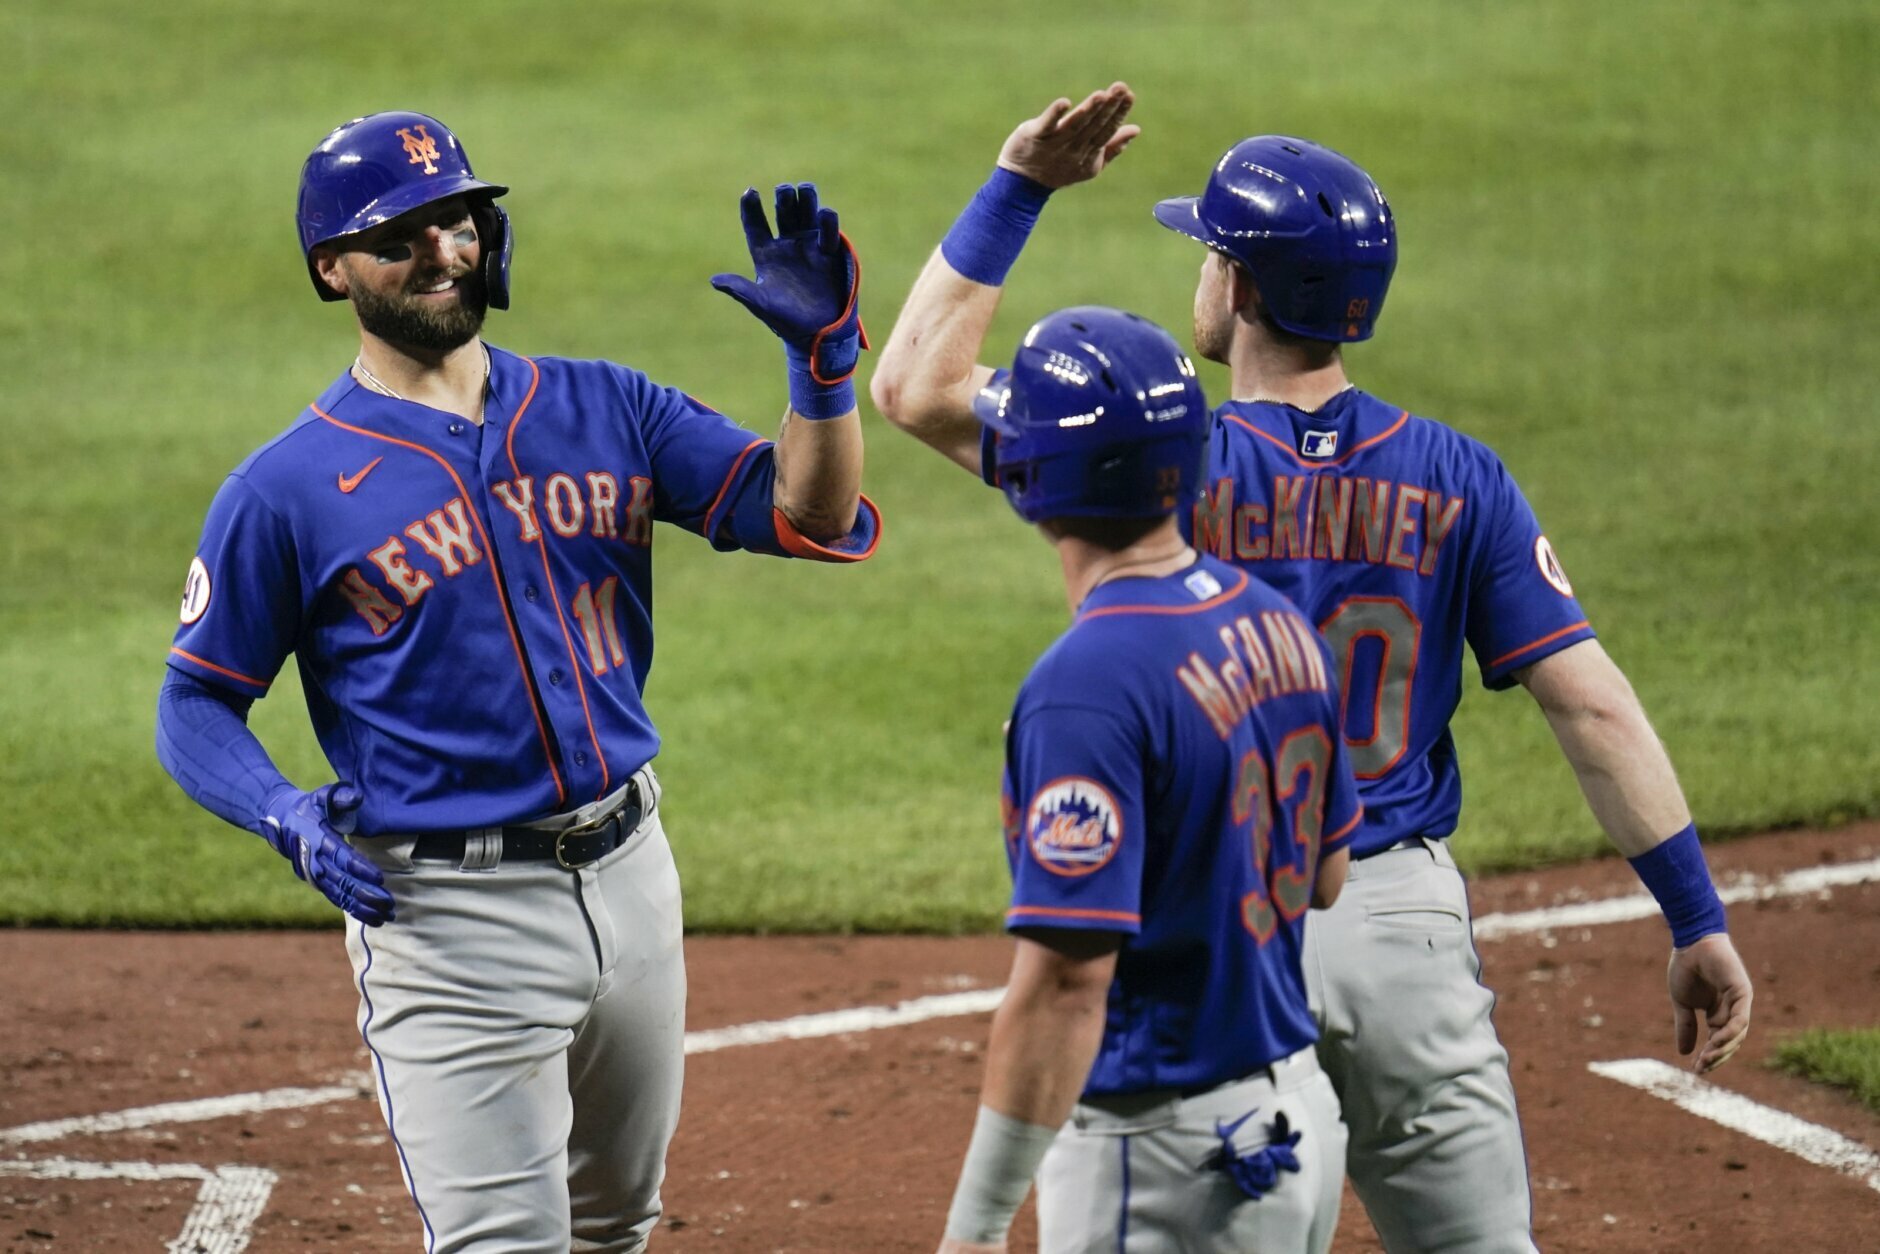 New York Mets' Kevin Pillar (11) is greeted near home pate by James McCann (33) and Billy McKinney after Pillar scored them all on a three-run home run off Baltimore Orioles starting pitcher Matt Harvey during the third inning of a baseball game, Wednesday, June 9, 2021, in Baltimore. (AP Photo/Julio Cortez)